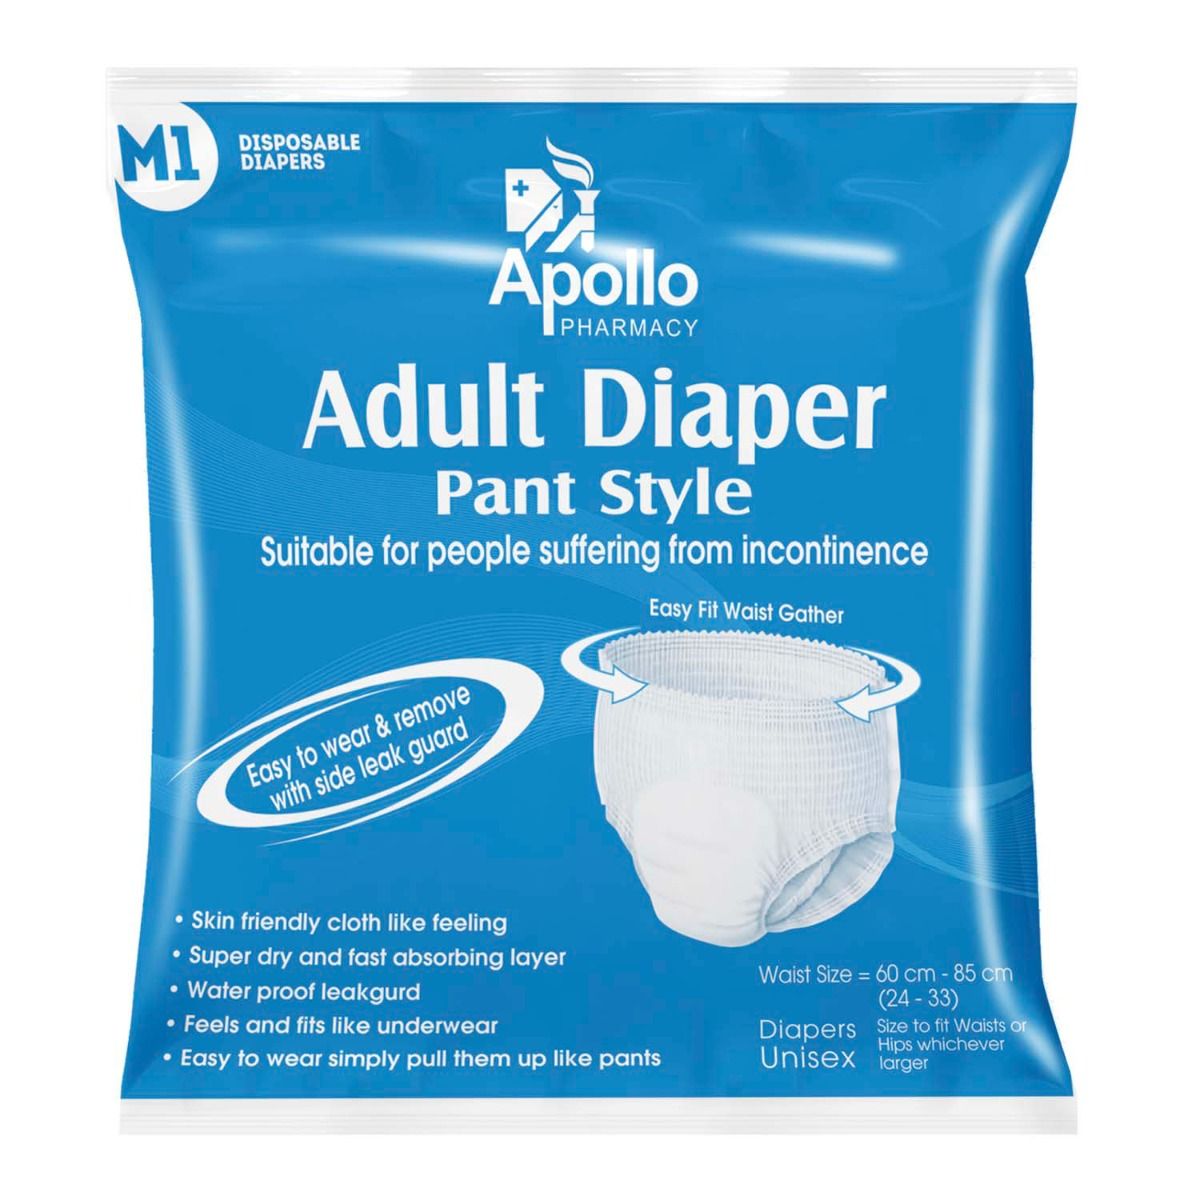 Apollo Pharmacy Adult Diaper Pants Medium, 1 Count Price, Uses, Side  Effects, Composition - Apollo Pharmacy